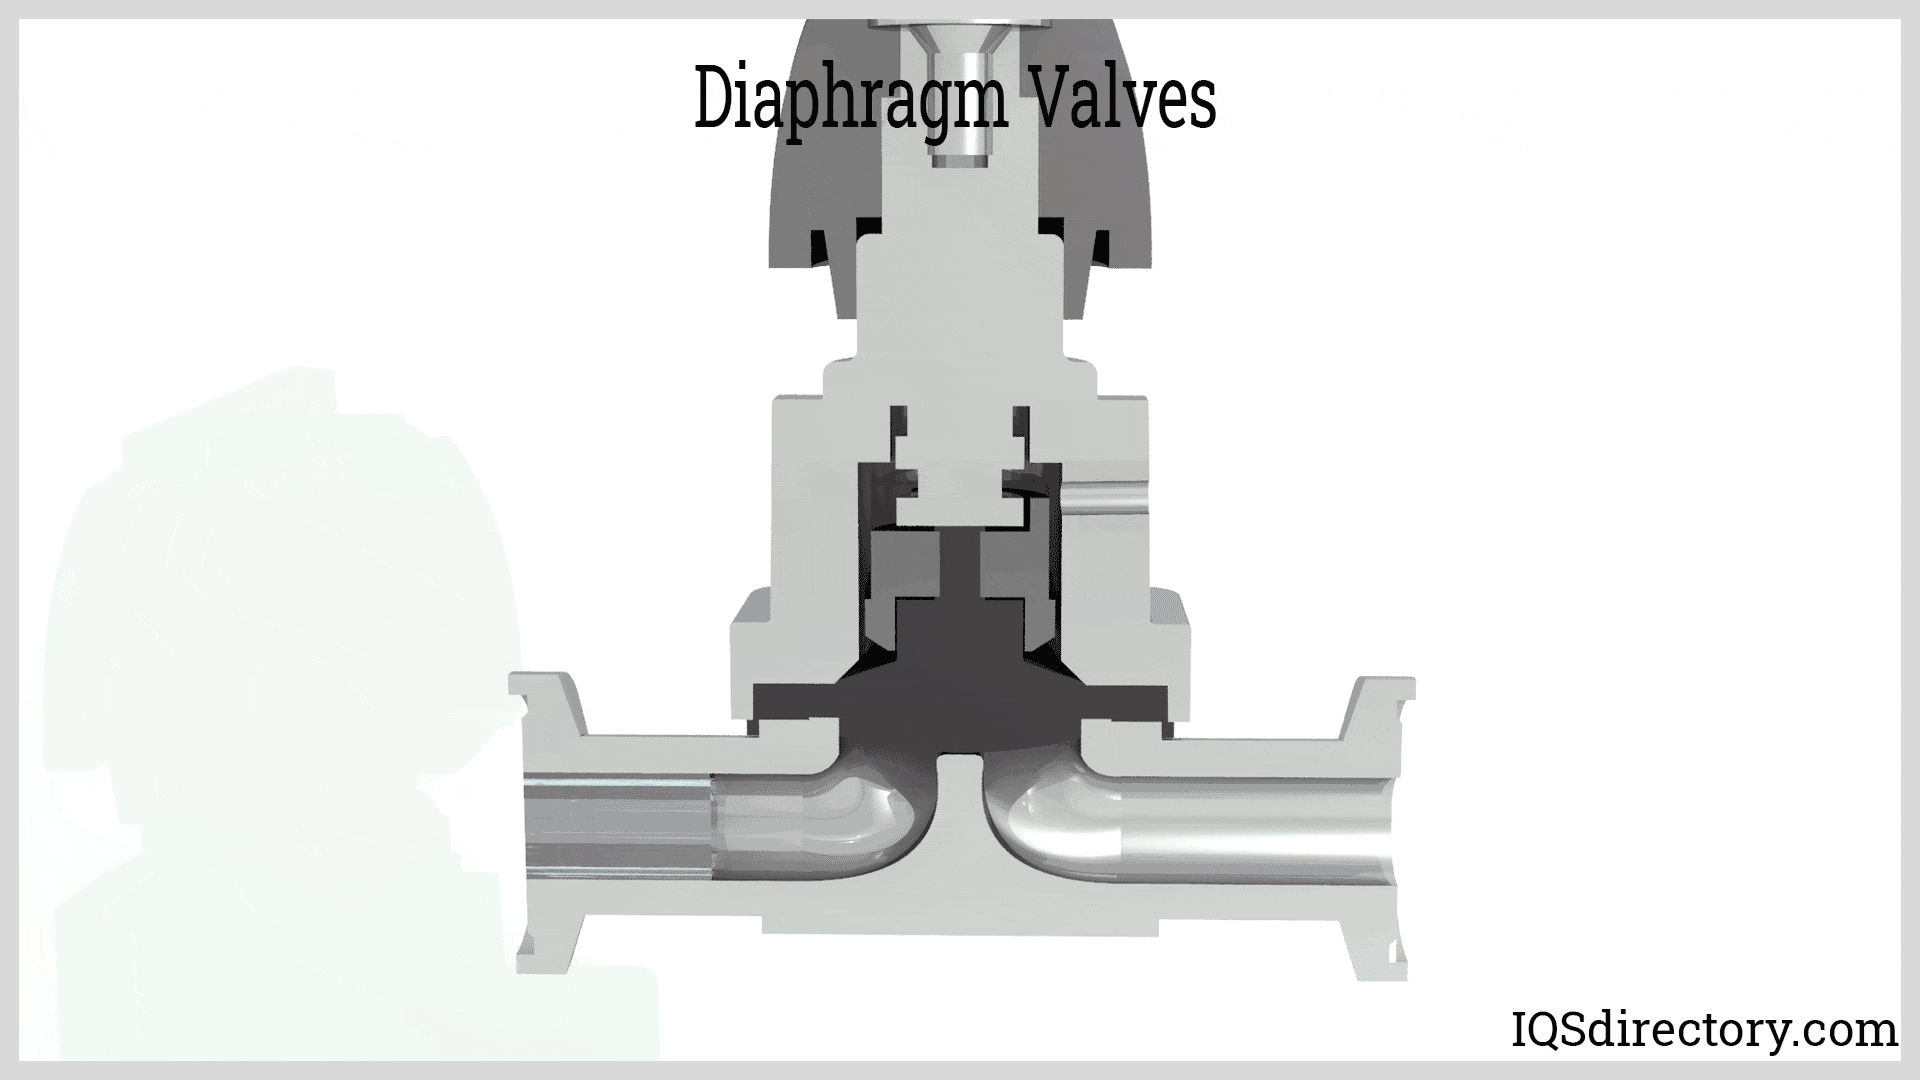 Diaphragm Valves: Types, Uses, Features and Benefits